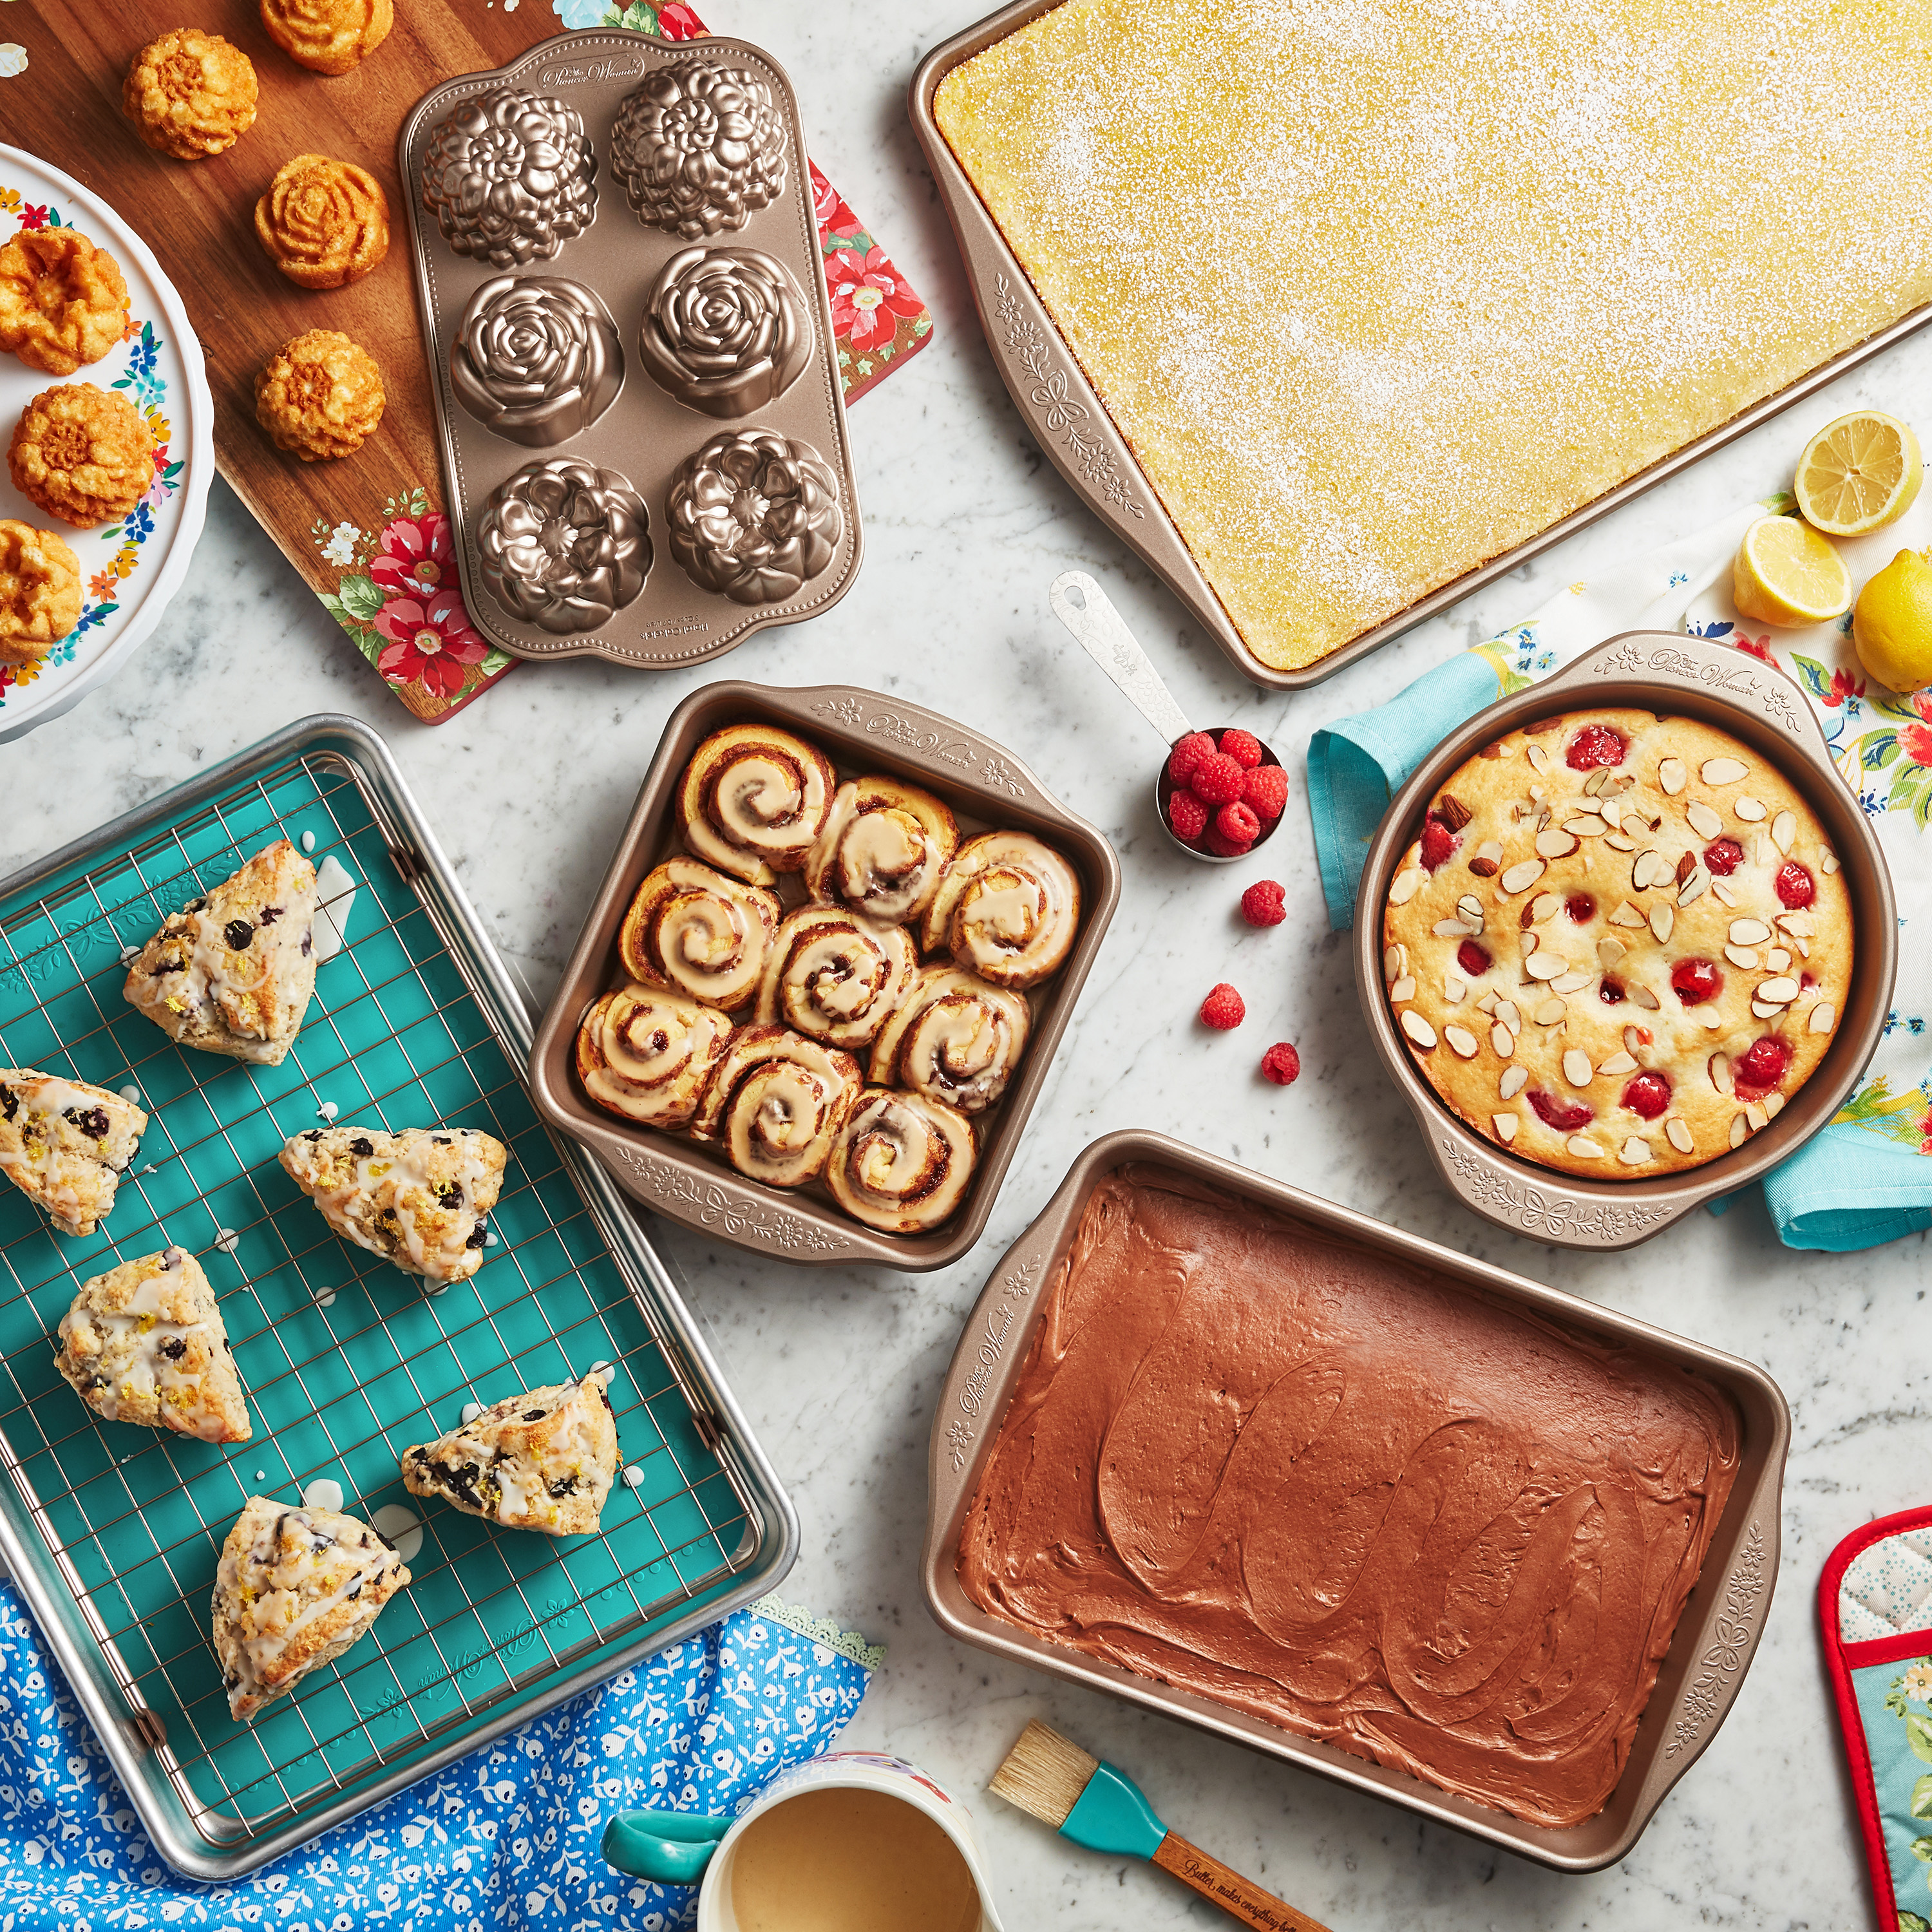 Bakeware Sets Clearance, Discounts & Rollbacks 